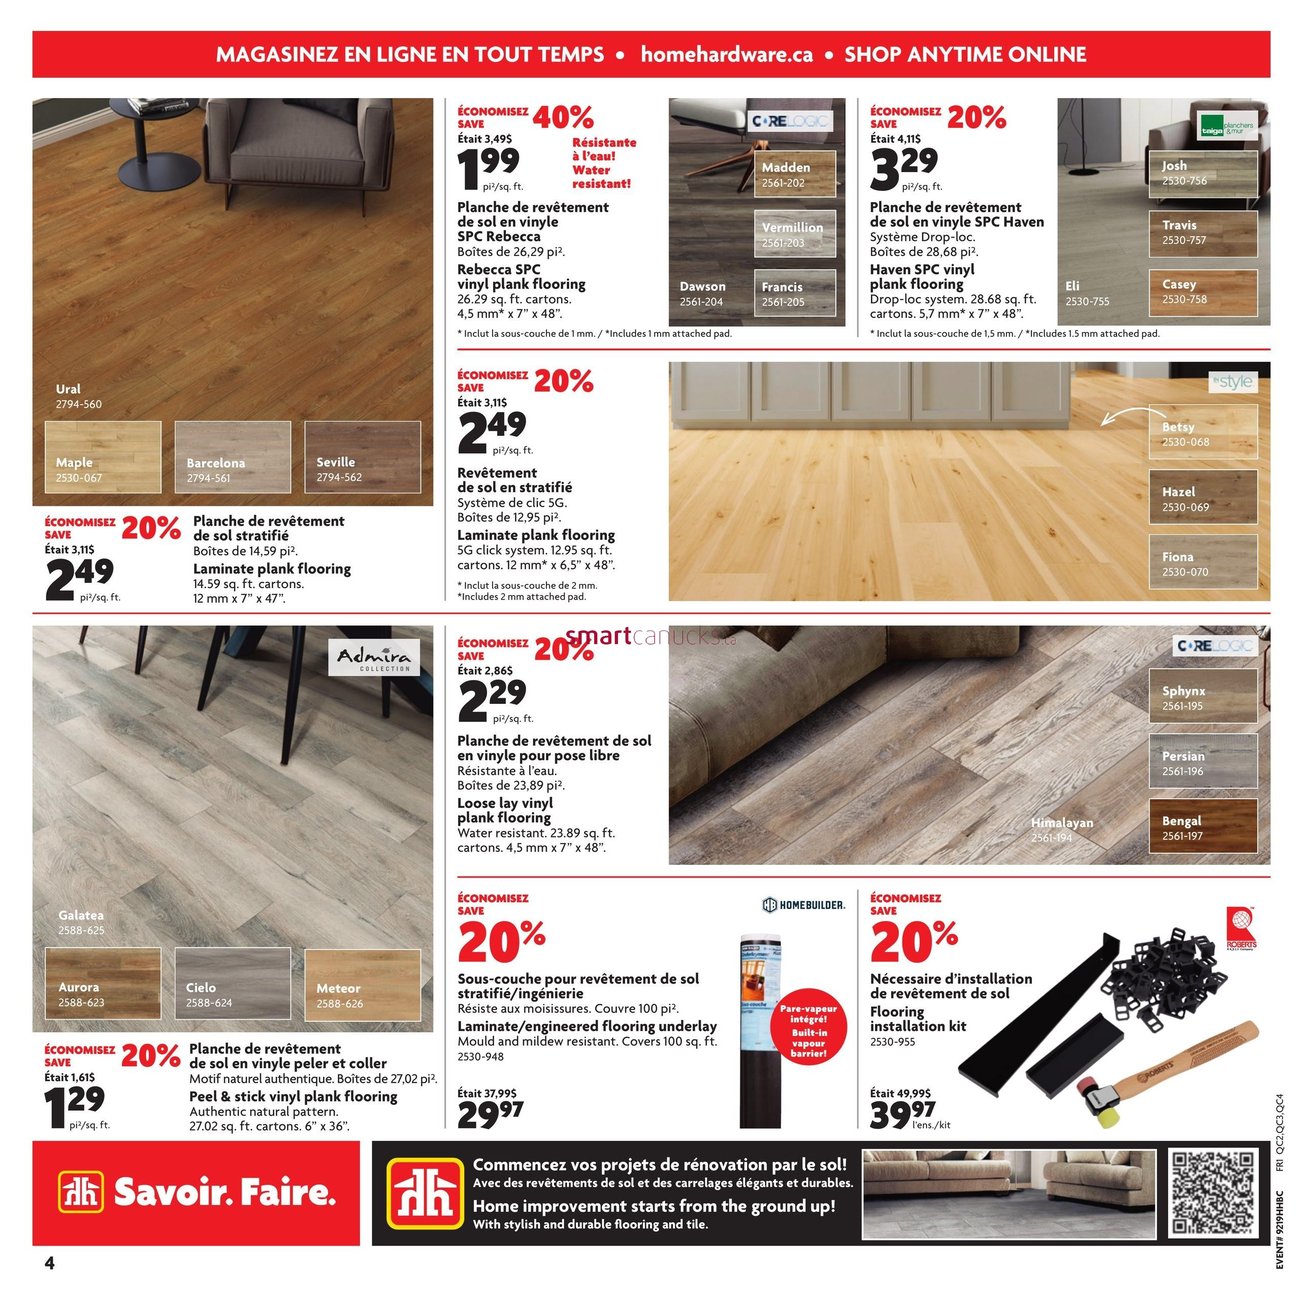 Home Hardware Building Centre - Quebec - 2 Weeks of Savings - Page 5